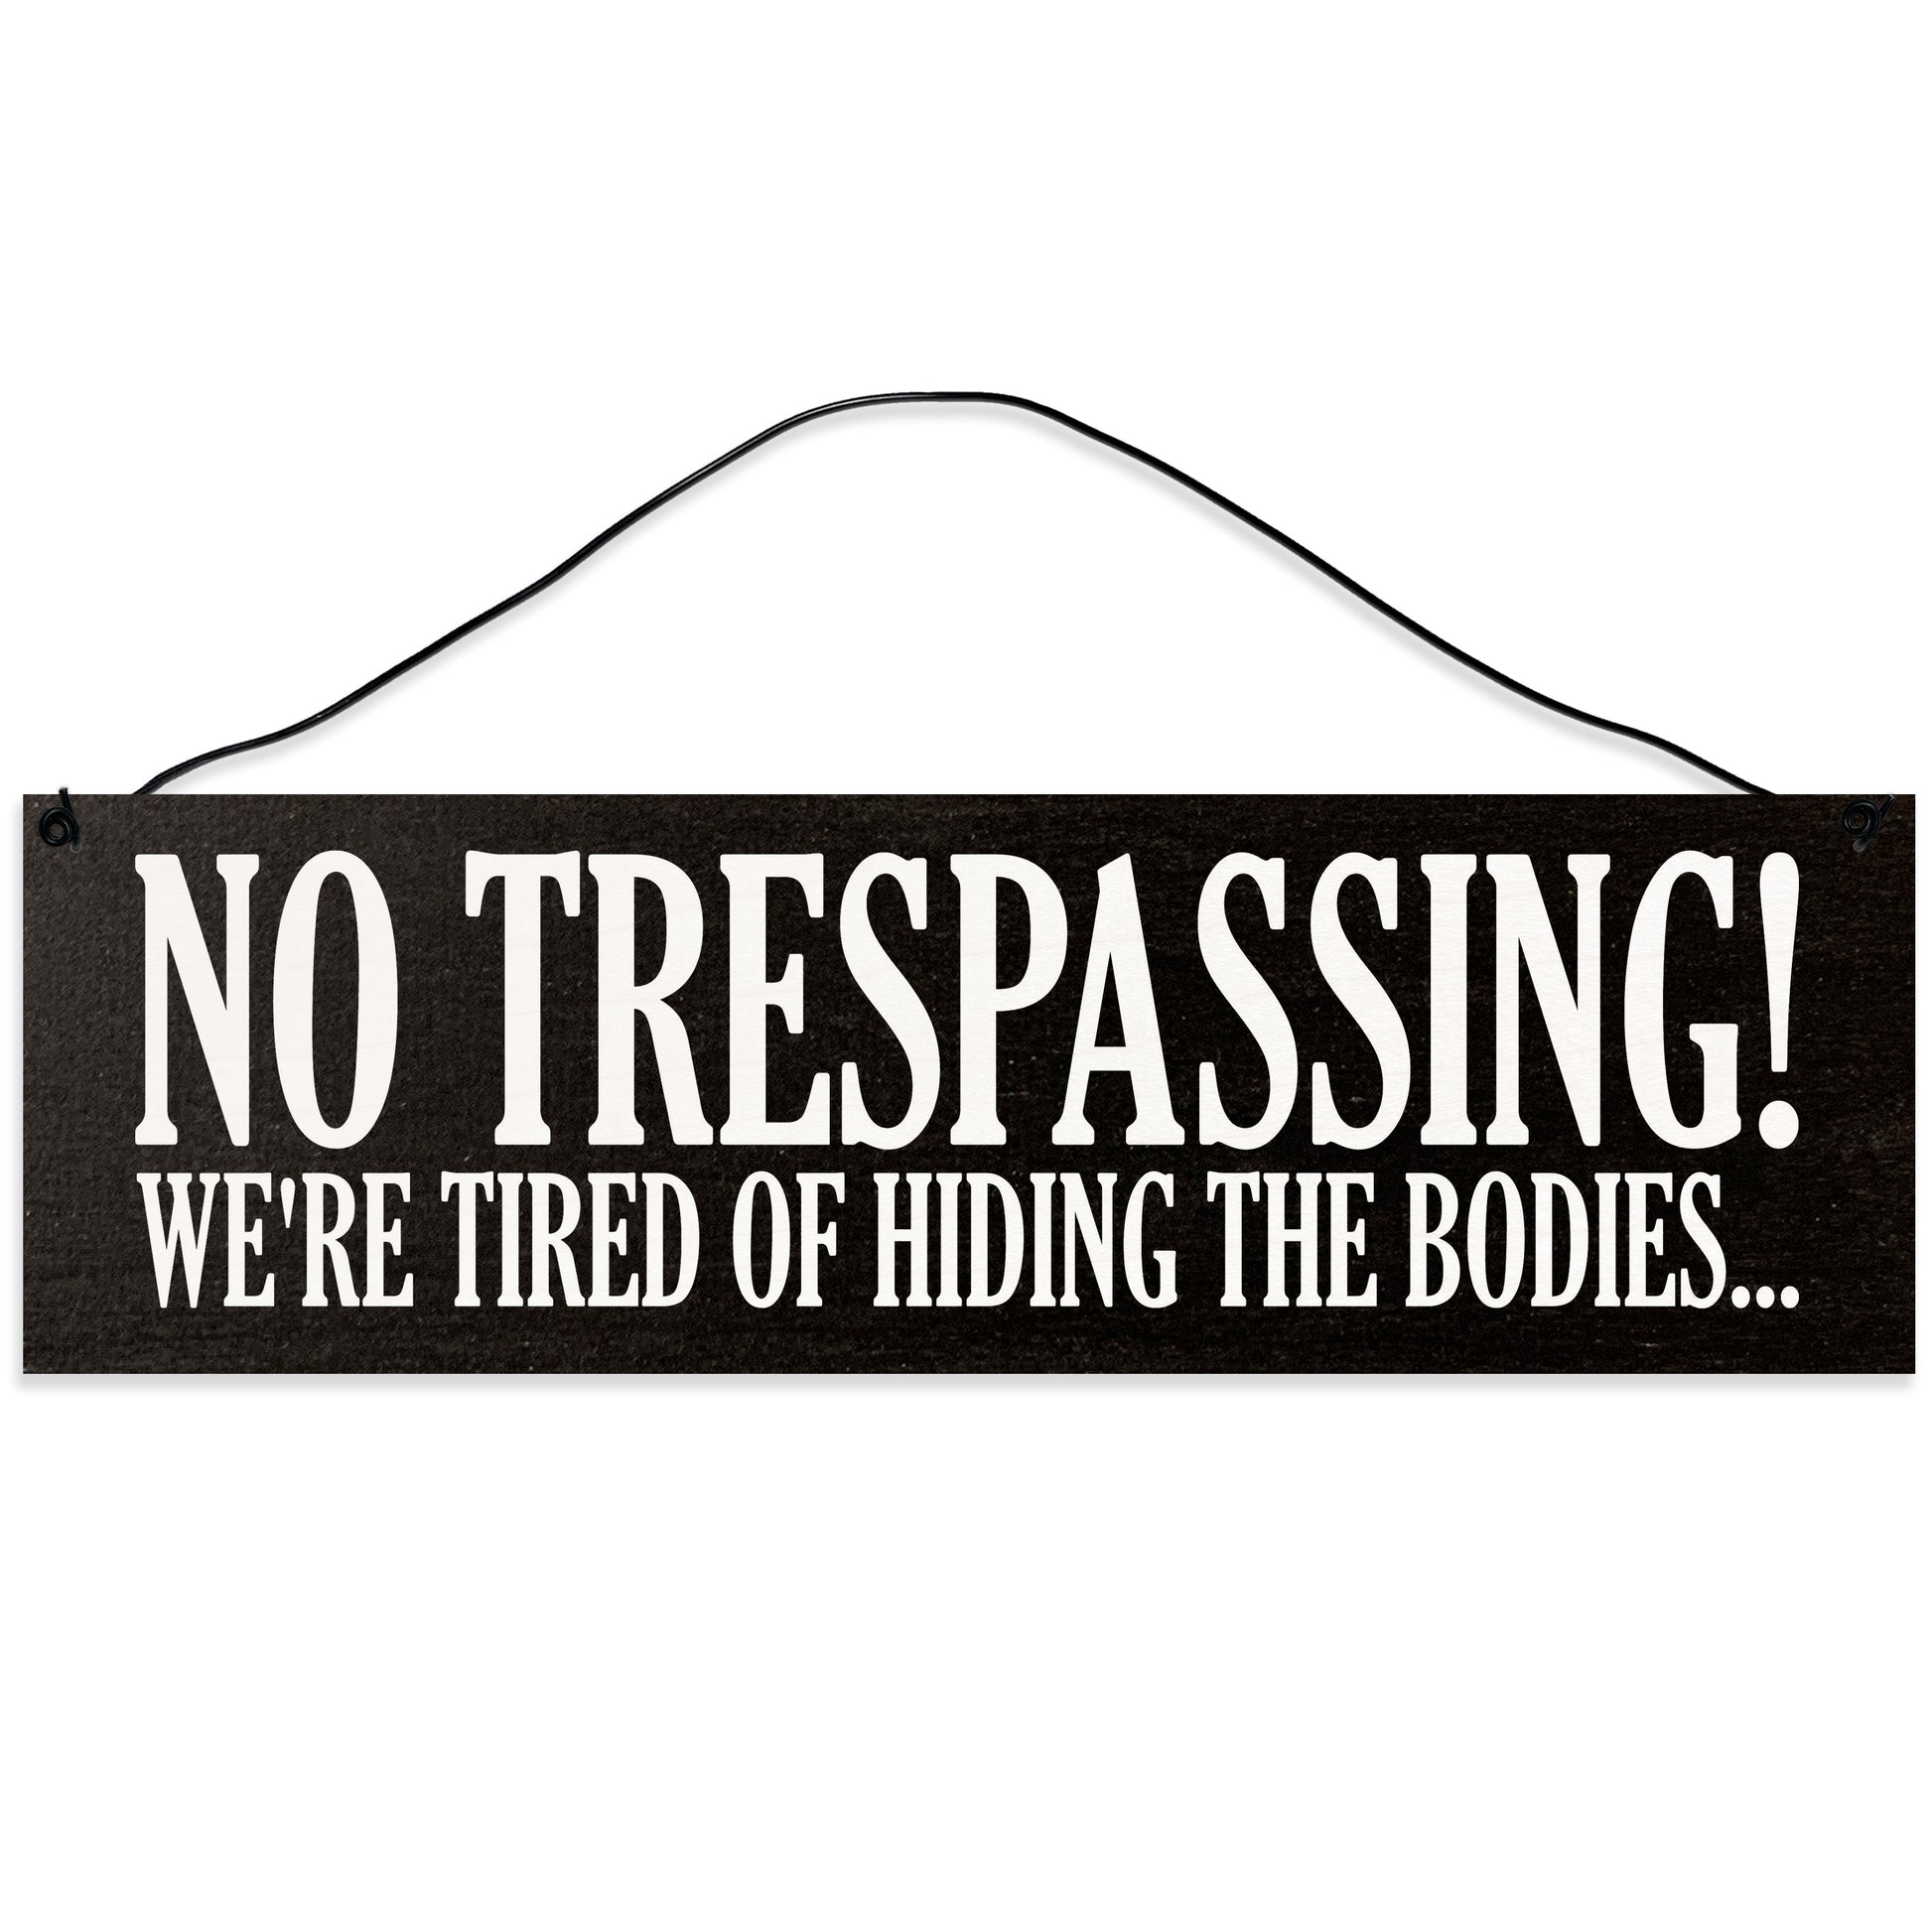 Sawyer's Mill - No Trespassing. Wood Sign for Home or Office. Measures 3x10 inches.